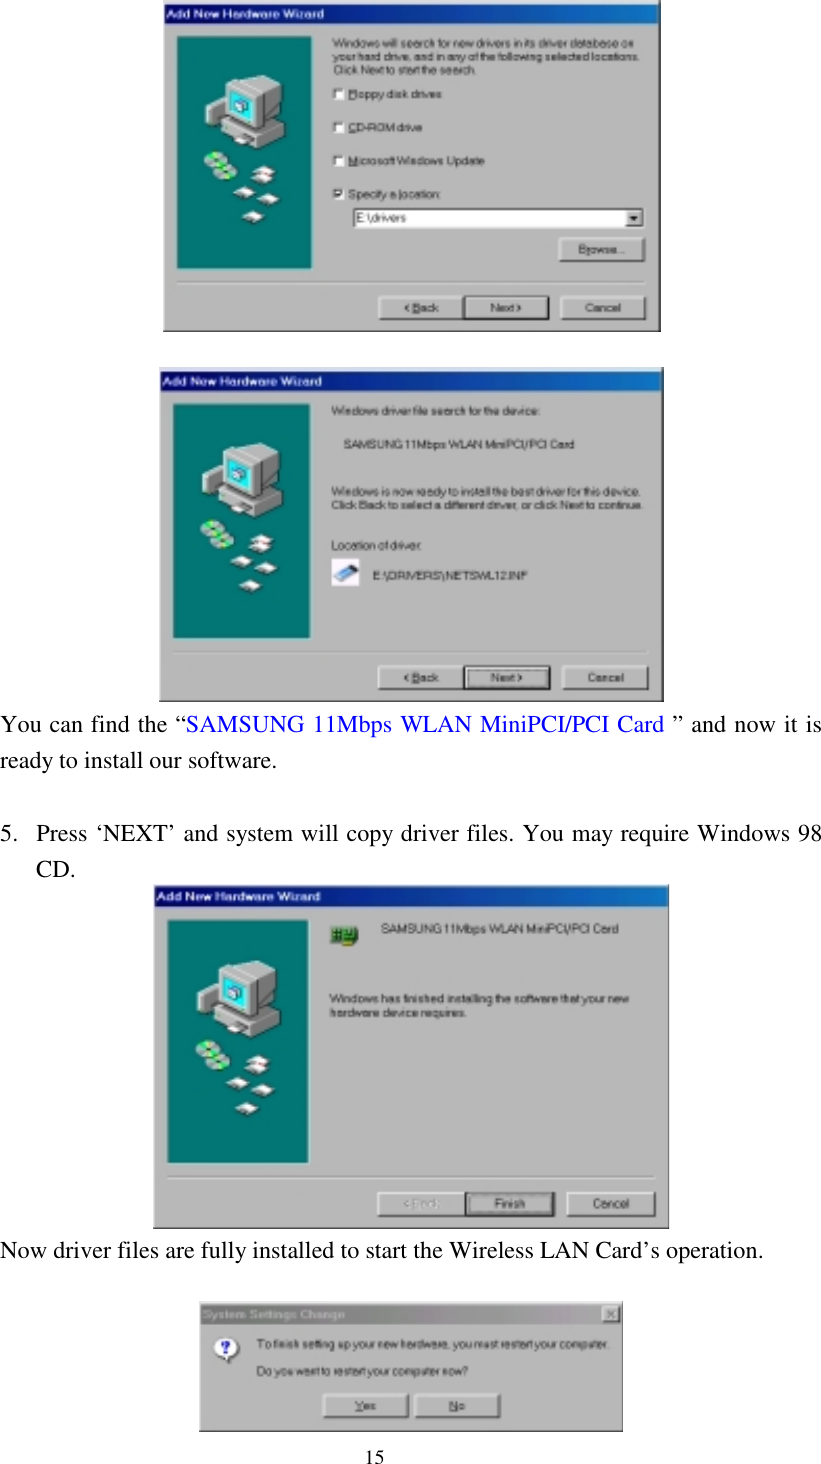  15    You can find the “SAMSUNG 11Mbps WLAN MiniPCI/PCI Card ” and now it is ready to install our software.   5.  Press ‘NEXT’ and system will copy driver files. You may require Windows 98 CD.  Now driver files are fully installed to start the Wireless LAN Card’s operation.   